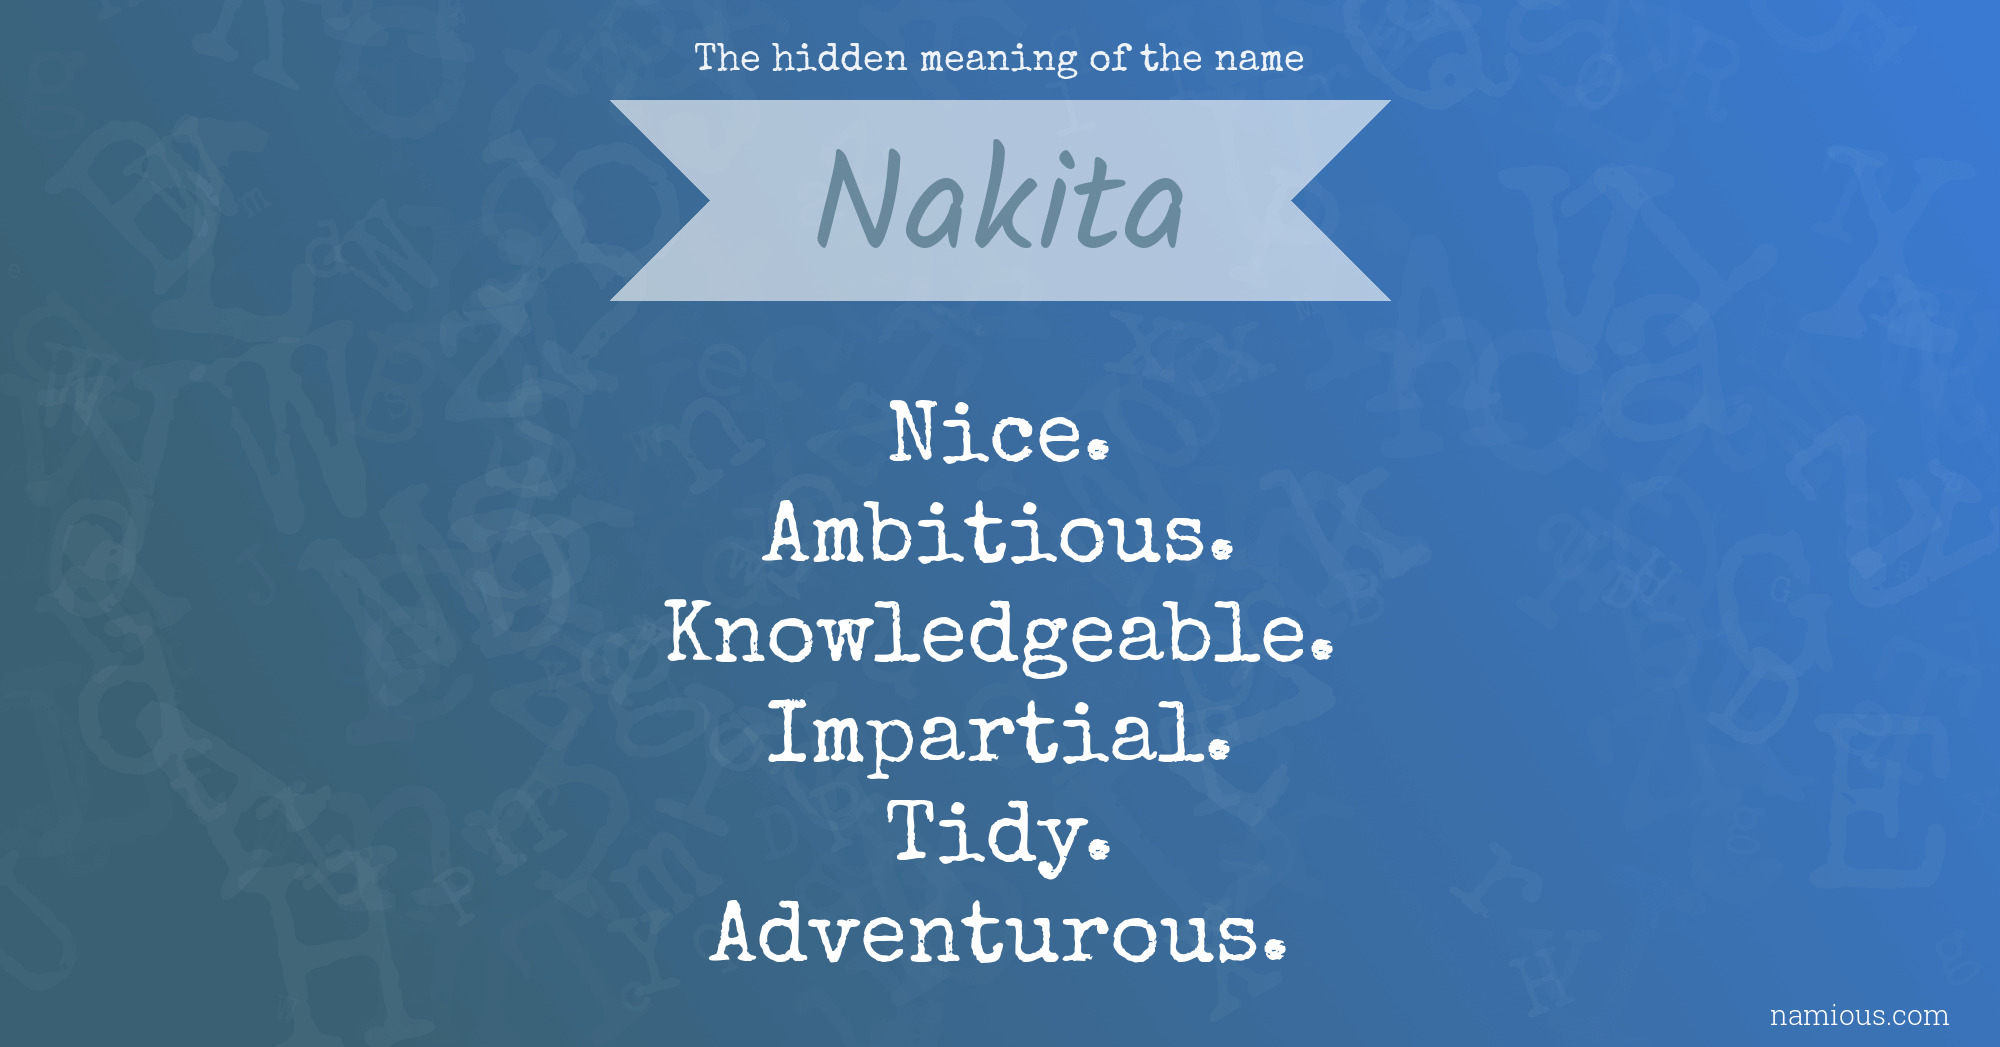 The hidden meaning of the name Nakita